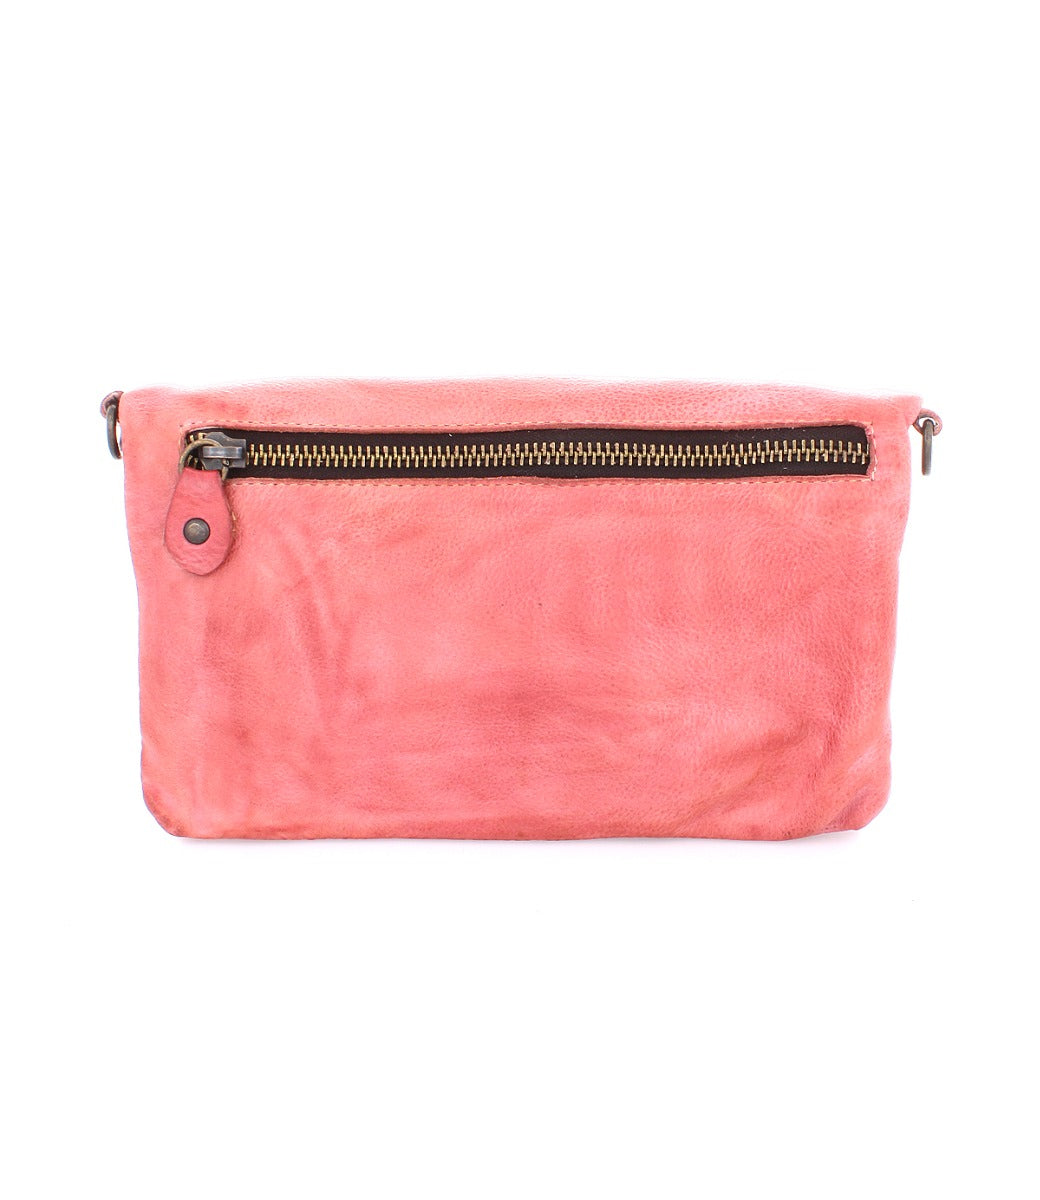 A pink leather Cadence clutch bag with a zipper by Bed Stu.